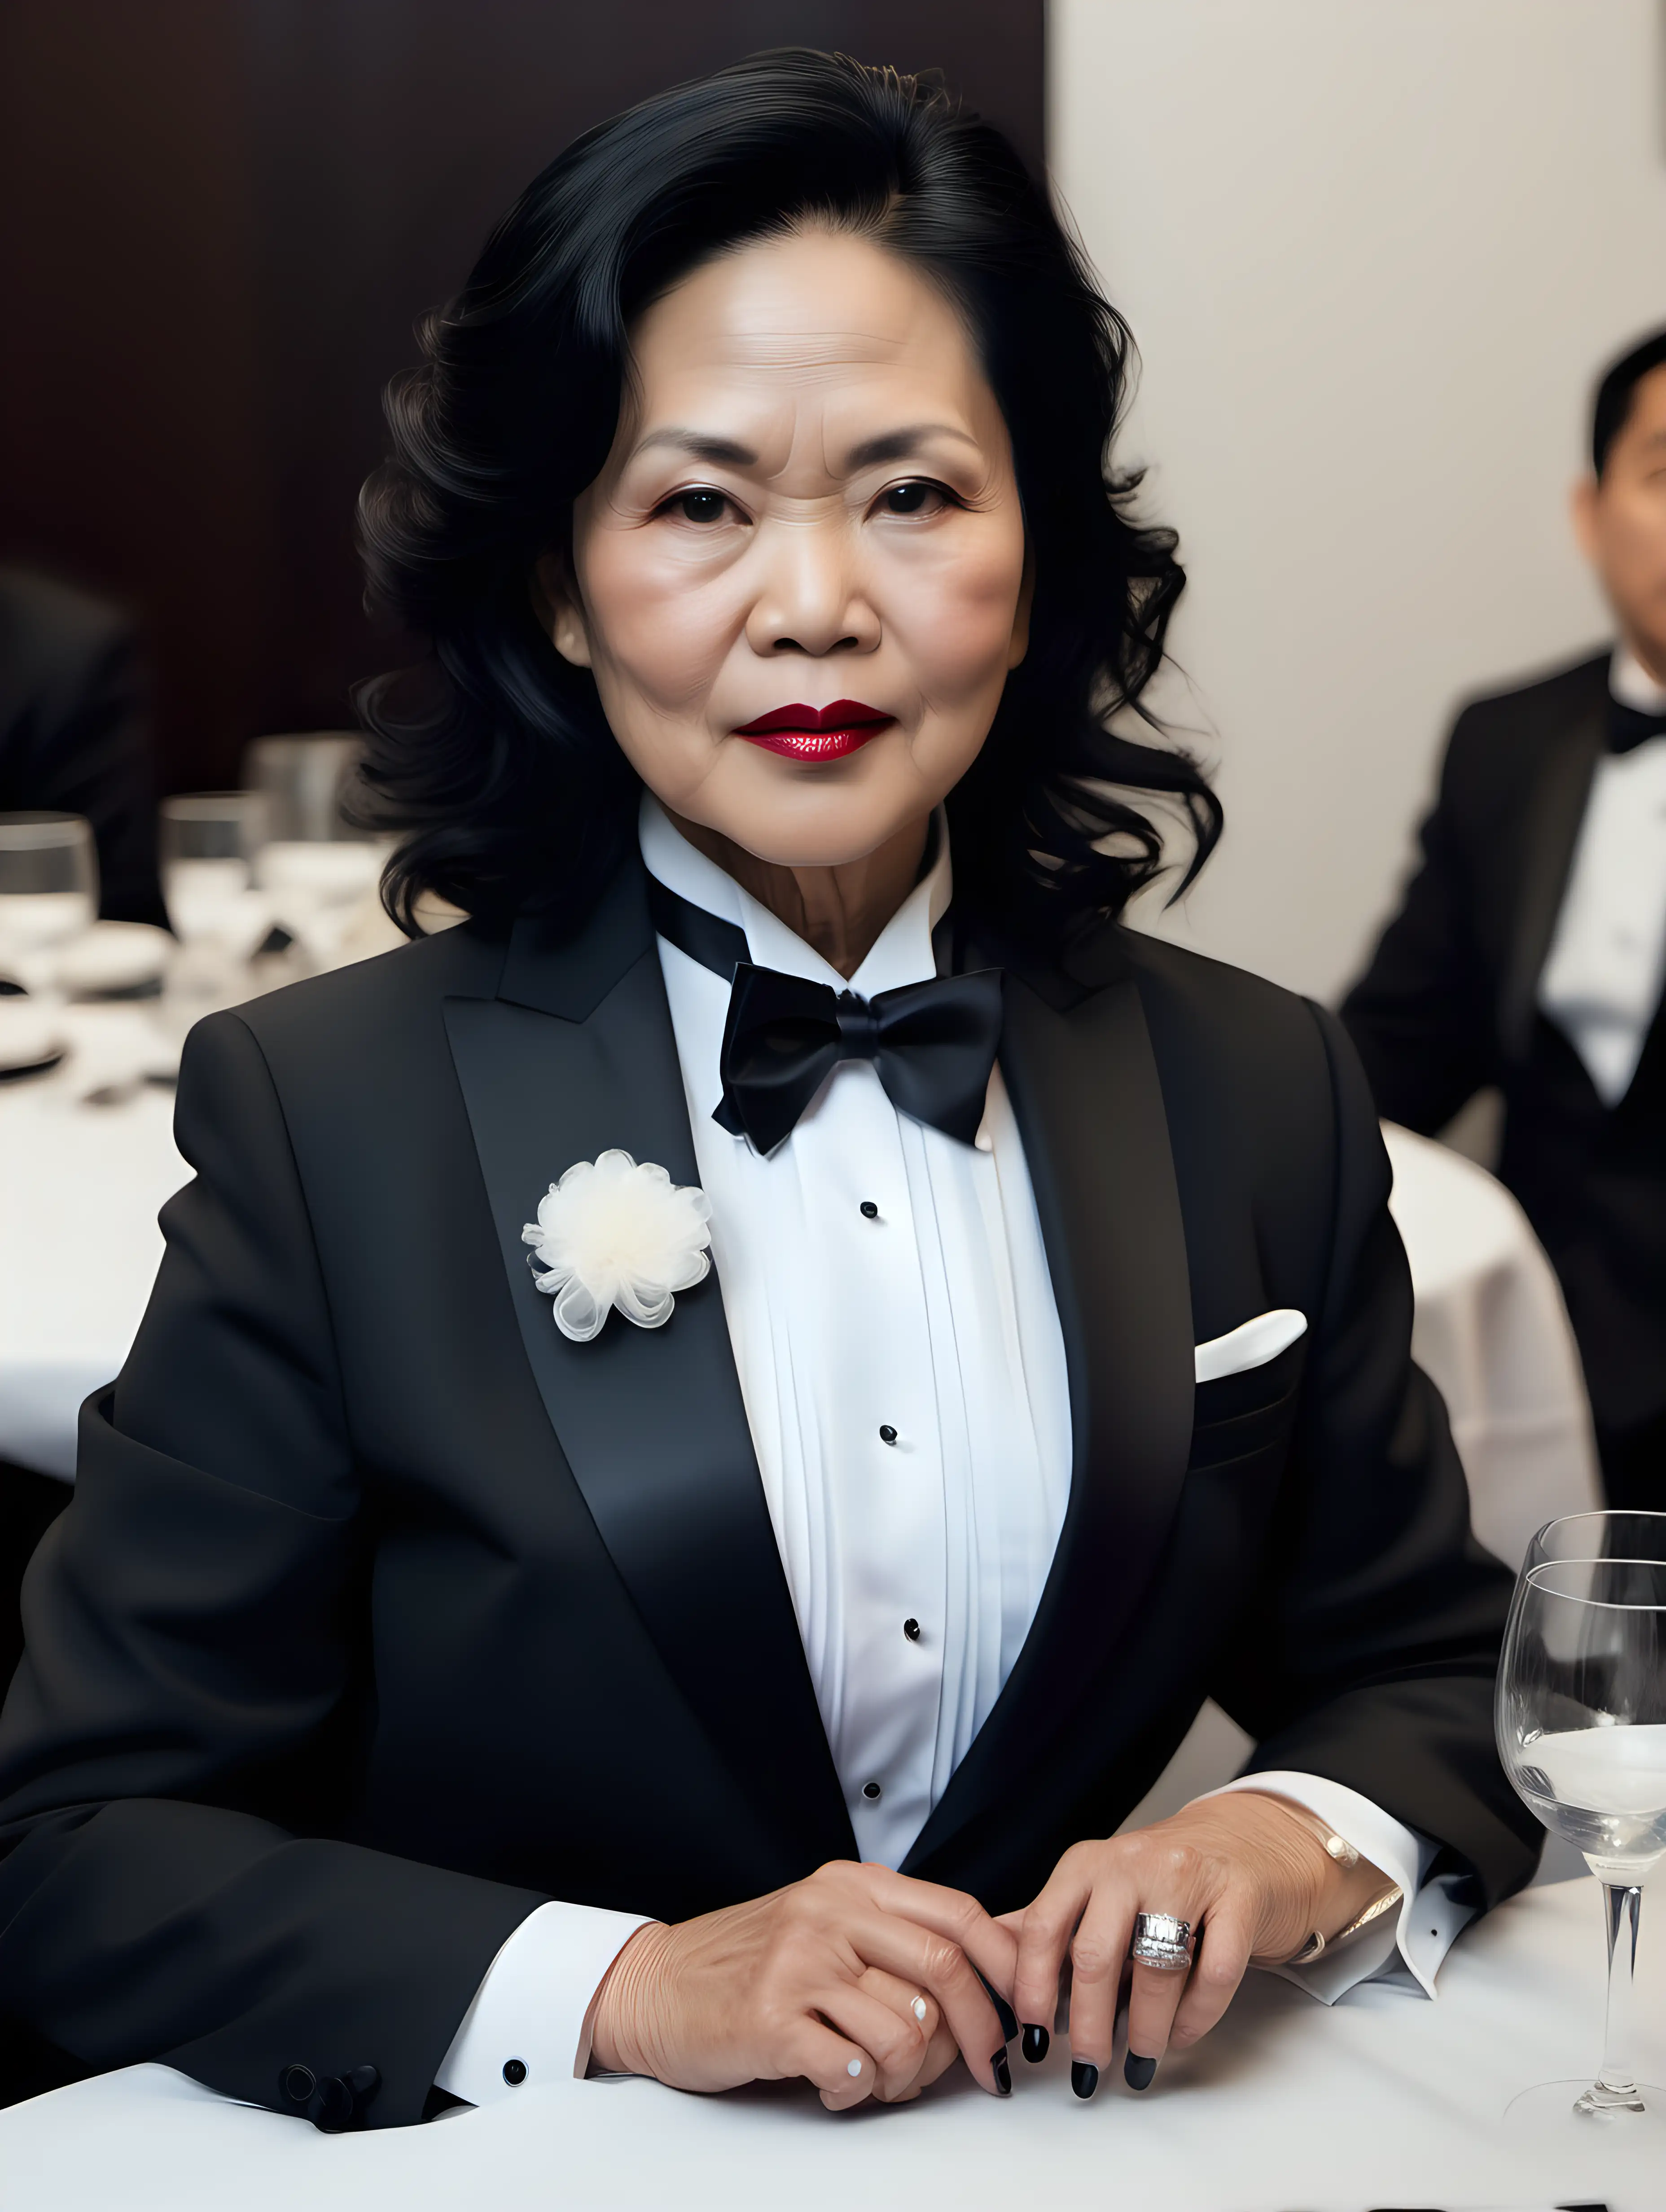 50 year old stern Vietnamese woman with black shoulder length hair and lipstick wearing a tuxedo with a black bow tie and big black cufflinks. Her jacket has a corsage. She is sitting at a dinner table.